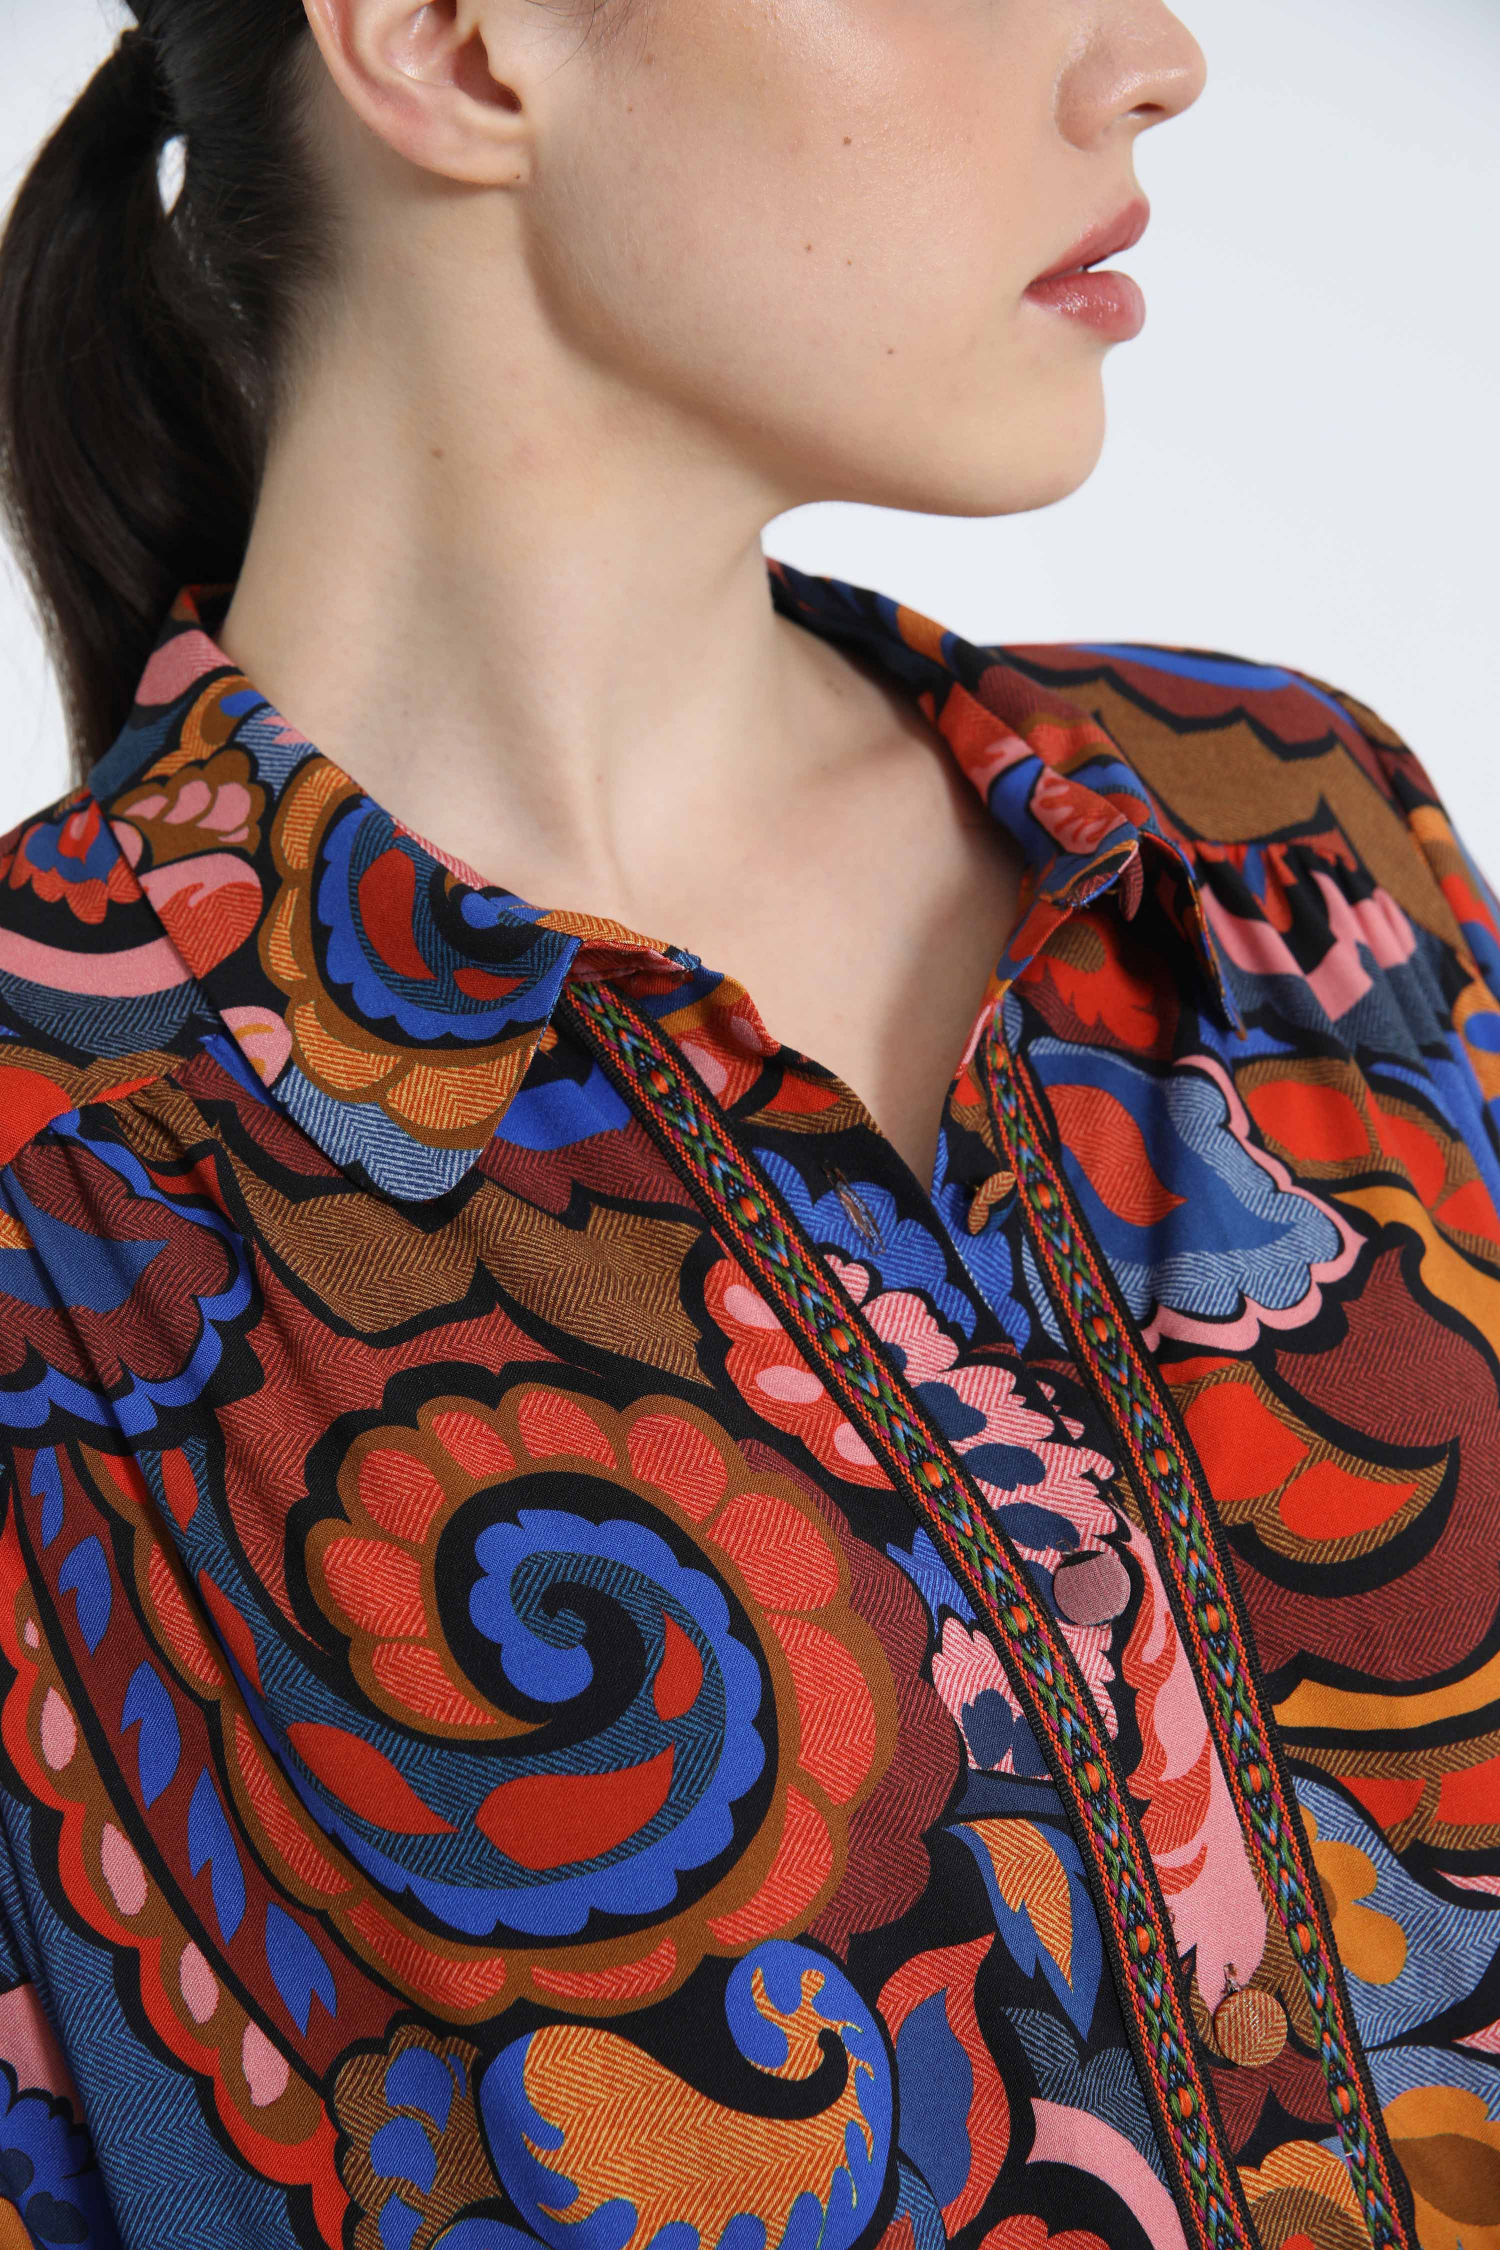 Trapezoid-shaped printed shirt with braid.